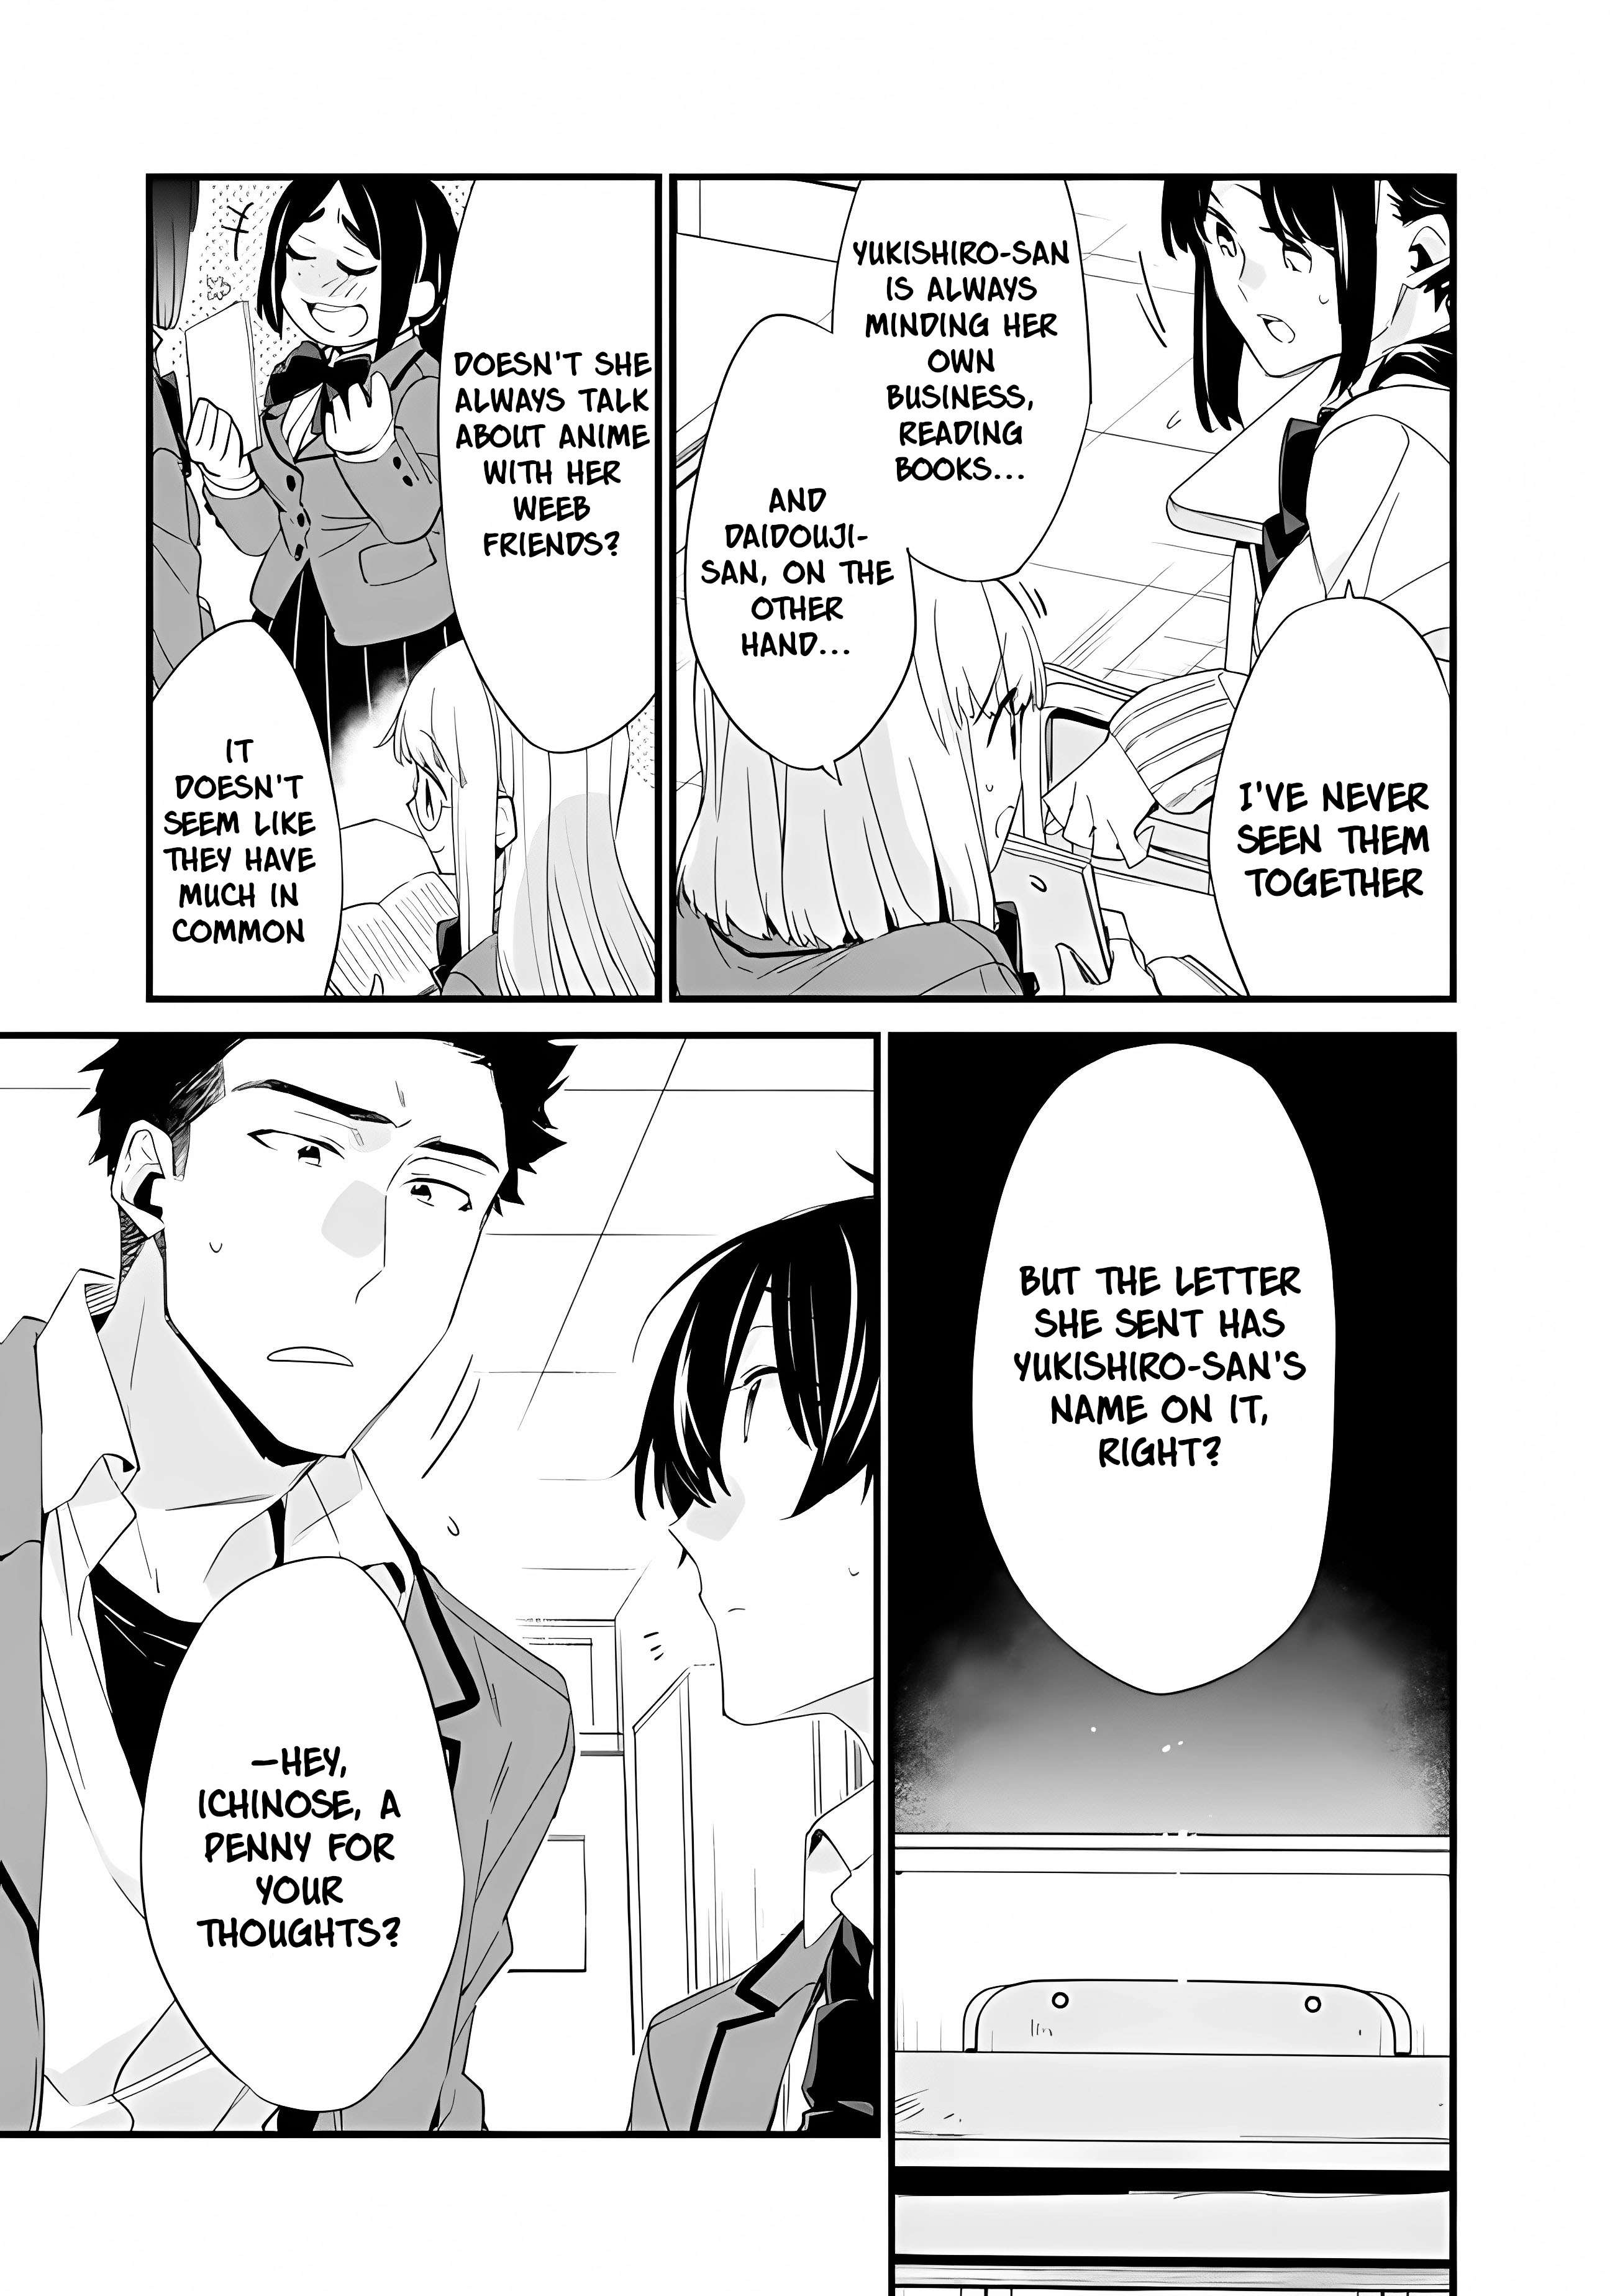 I’M Sick And Tired Of My Childhood Friend’S, Now Girlfriend’S, Constant Abuse So I Broke Up With Her - chapter 12 - #4